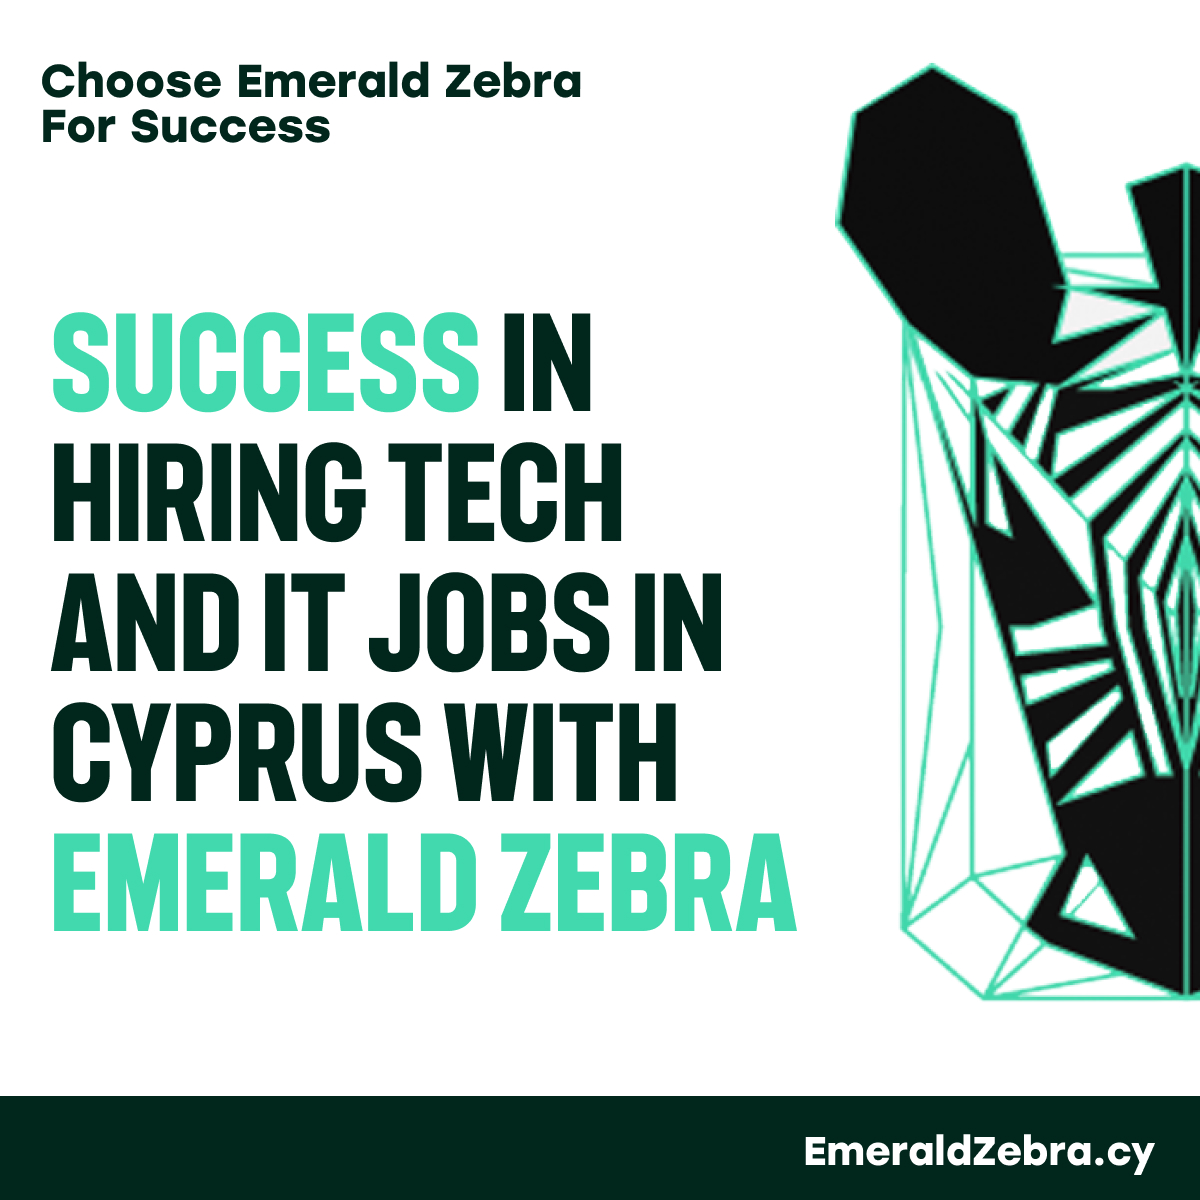 Success in hiring Tech and IT Jobs in Cyprus with Emerald Zebra